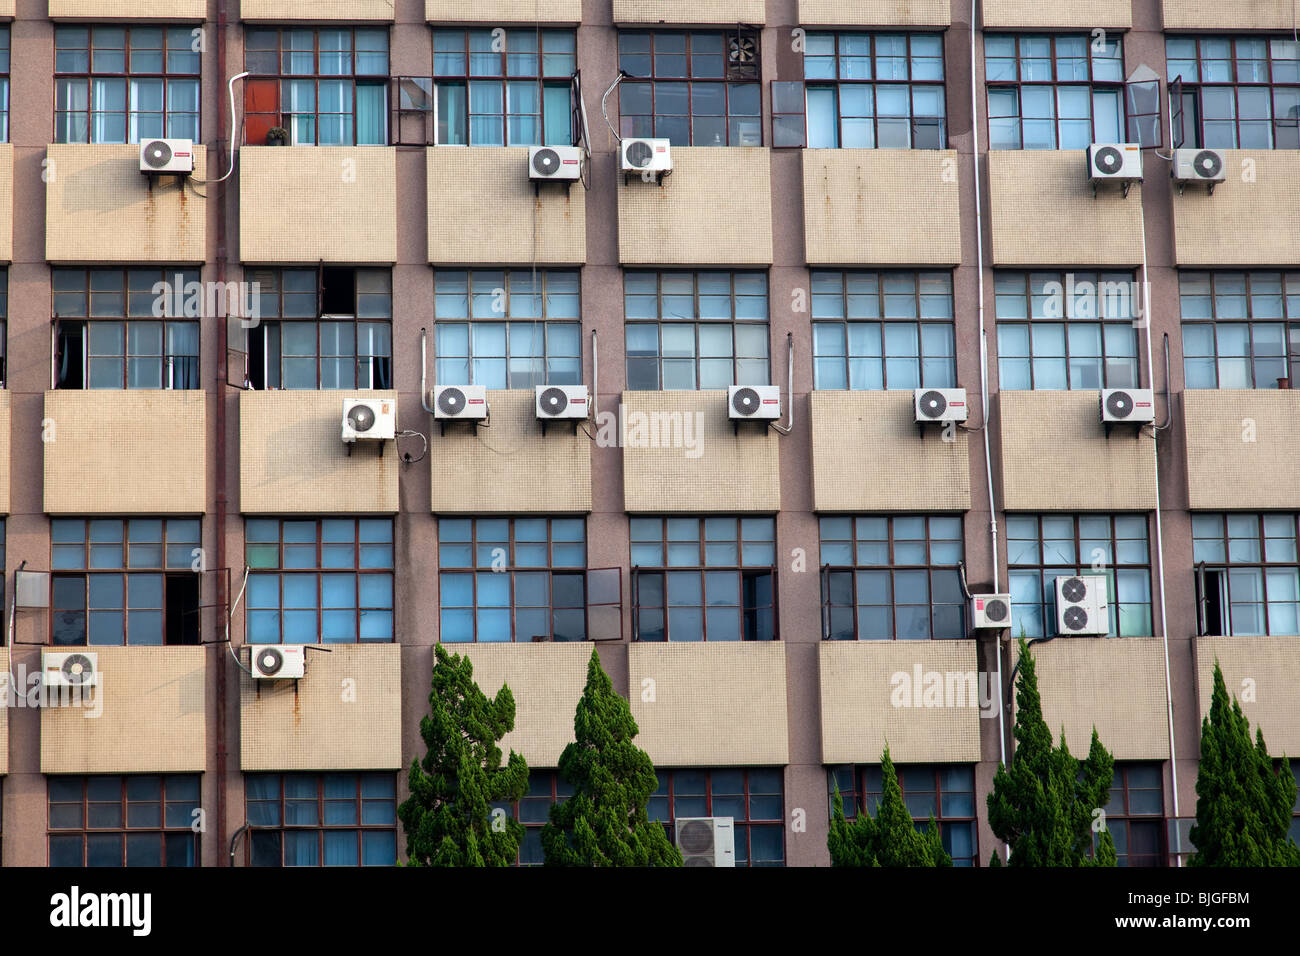 Building with many air conditioning units on campus of Fudan University, Shanghai, China Stock Photo